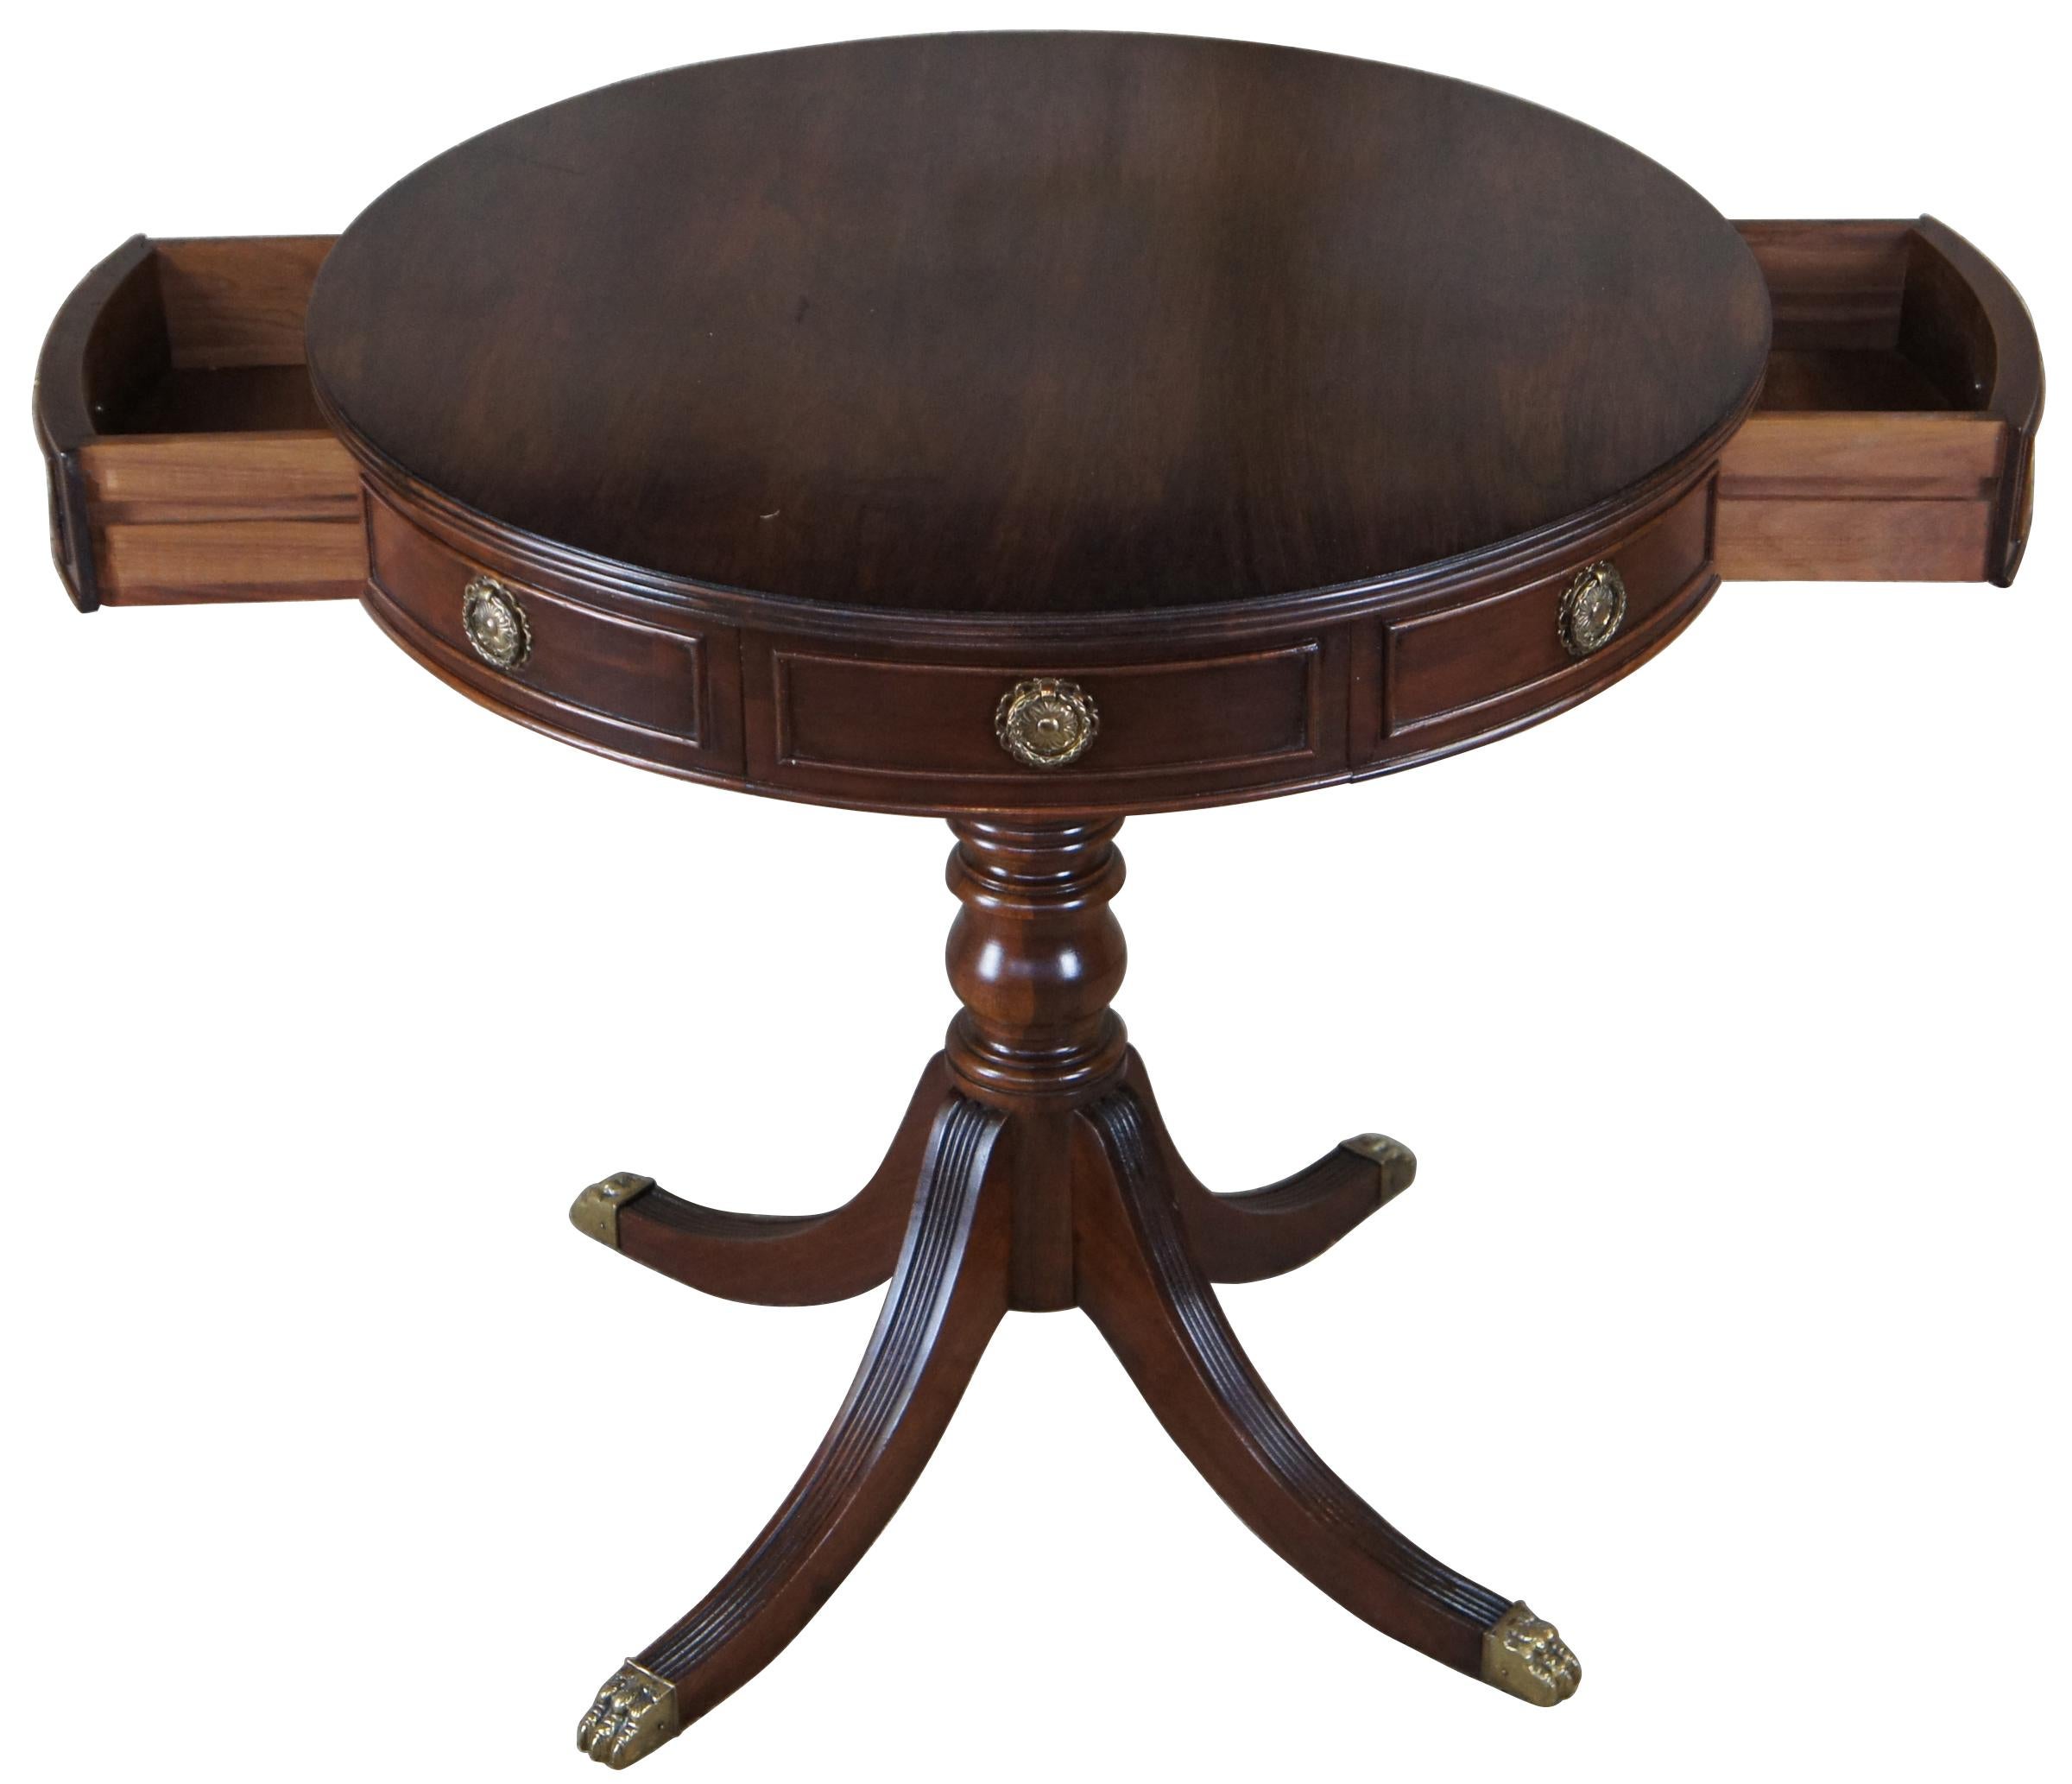 Sheraton style mid 20th century mahogany drum table. Features a round top with fluted edge and two drawers over a turned baluster base leading to four saber legs. 
 